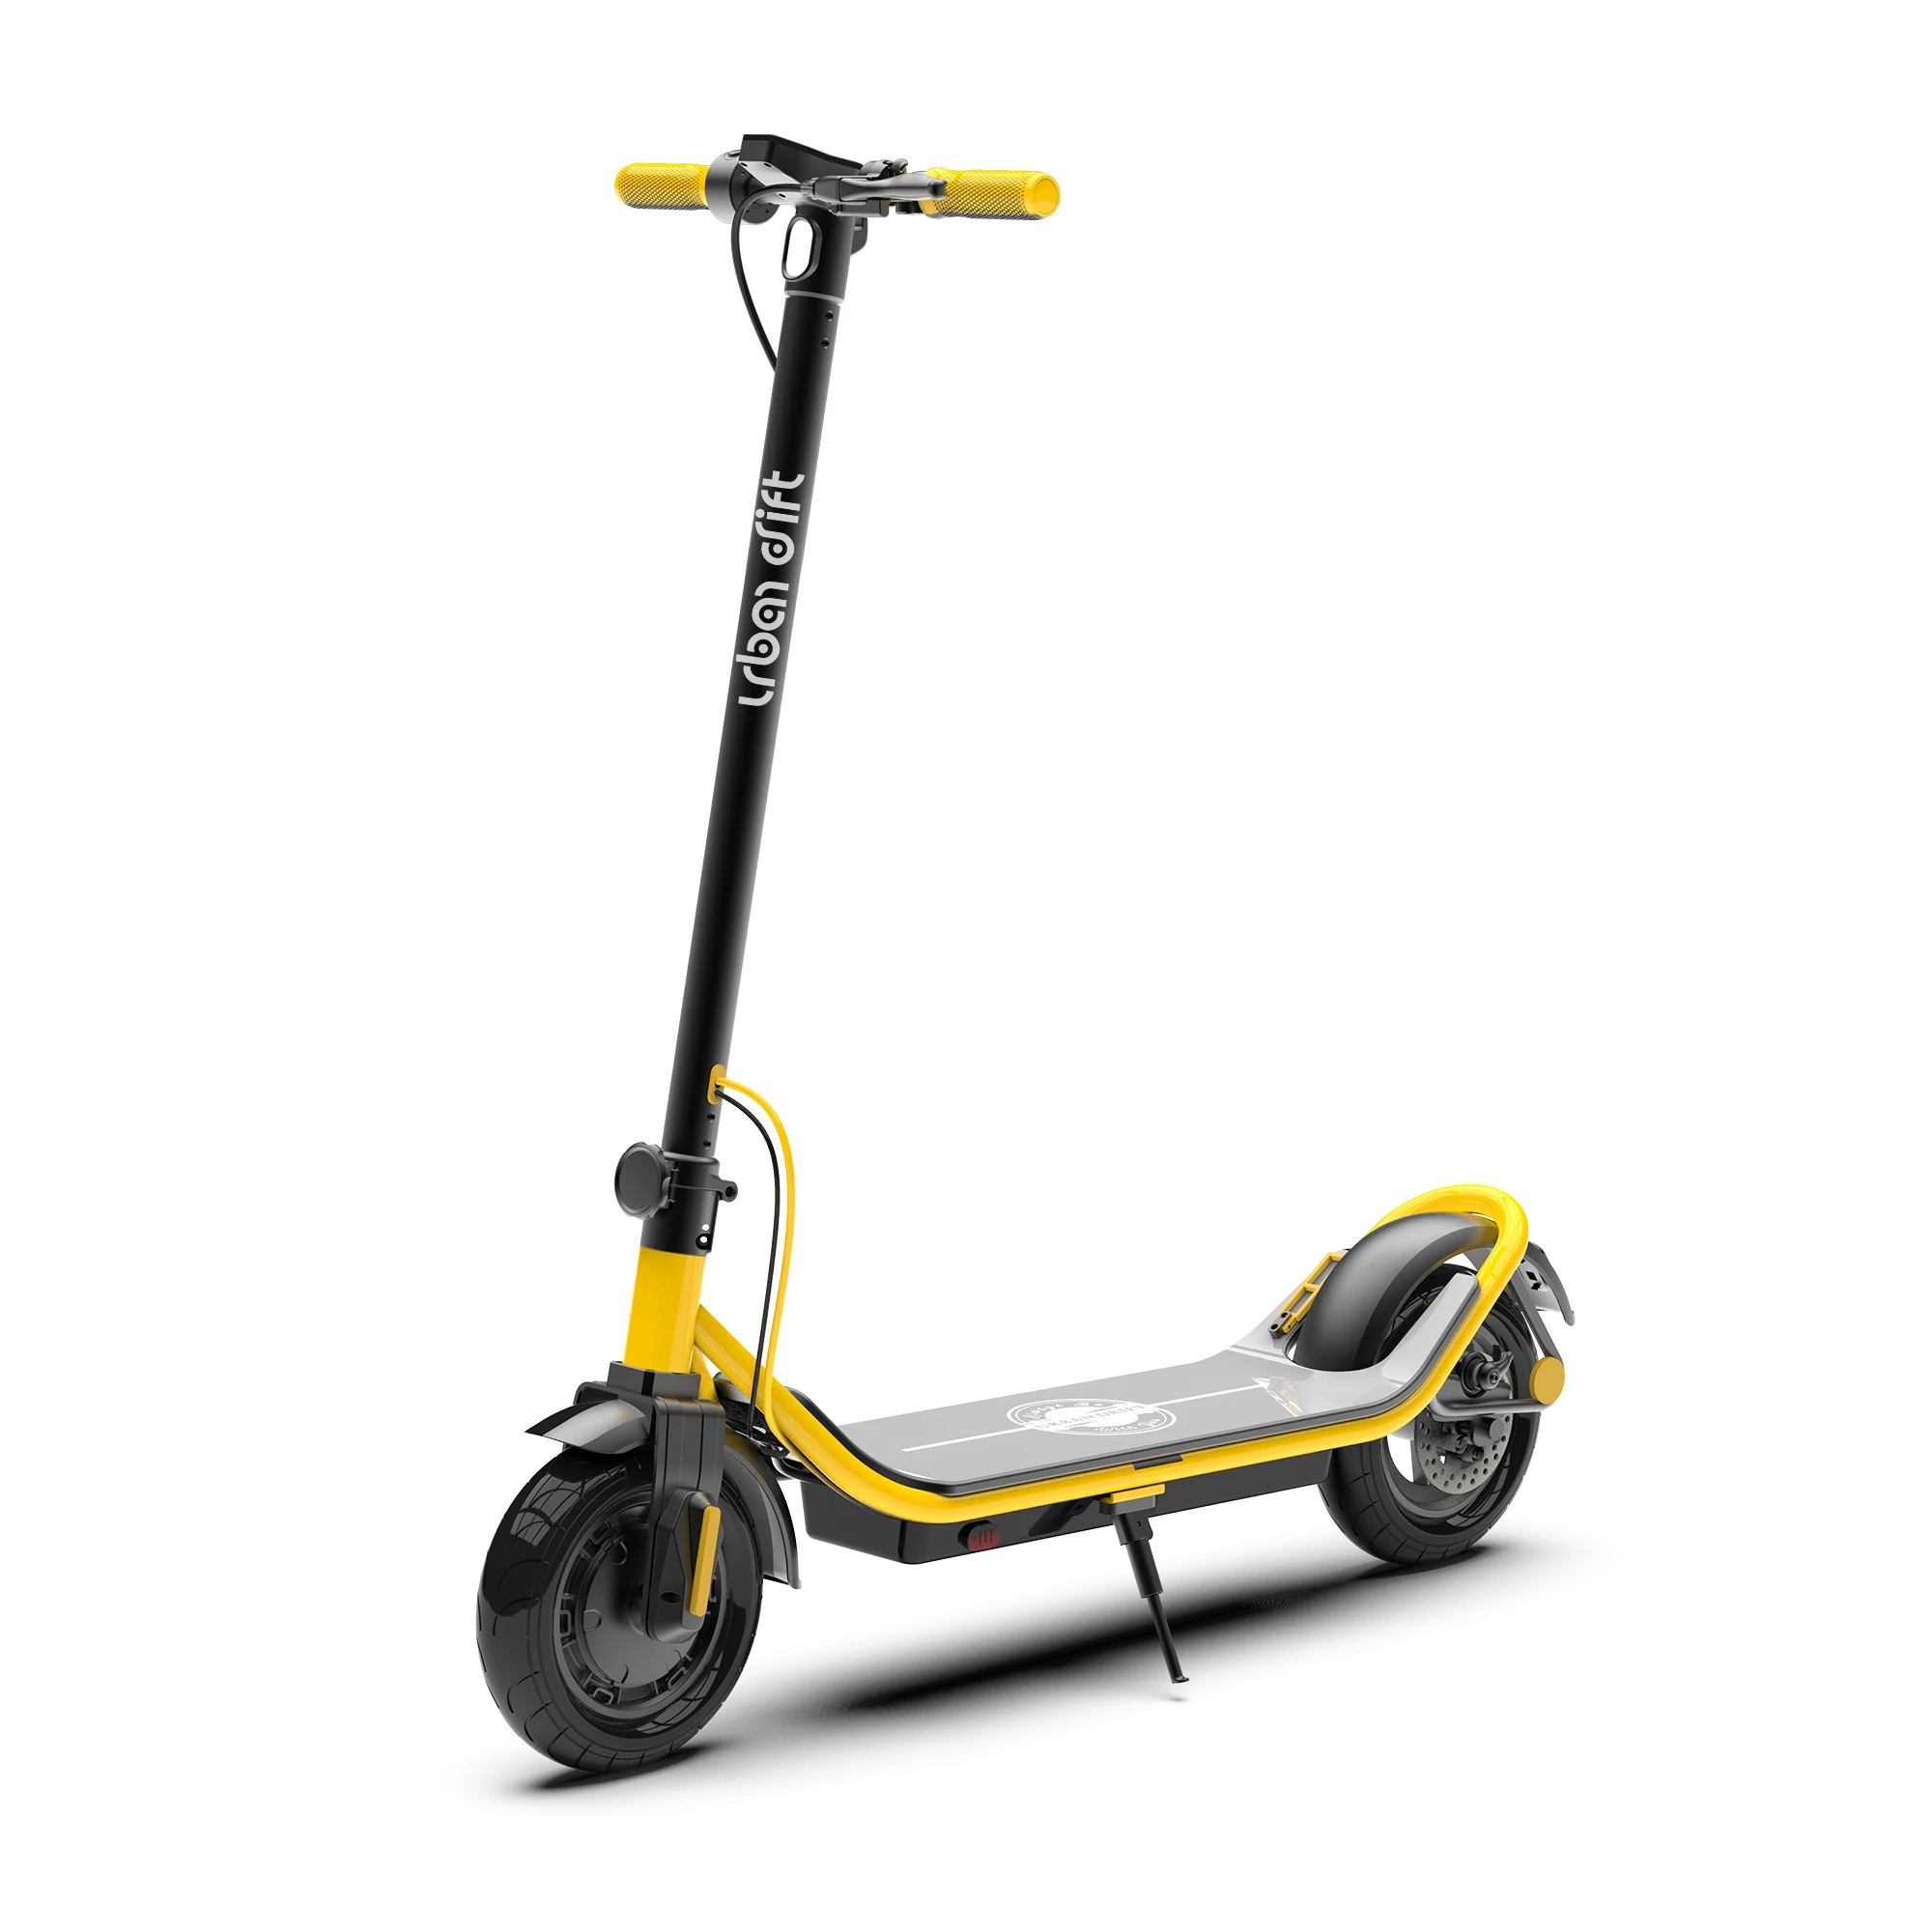 

10-inch big wheel light weight folding electric scooters with App US stock EU warehouse drop shipping ready to ship e-scooter